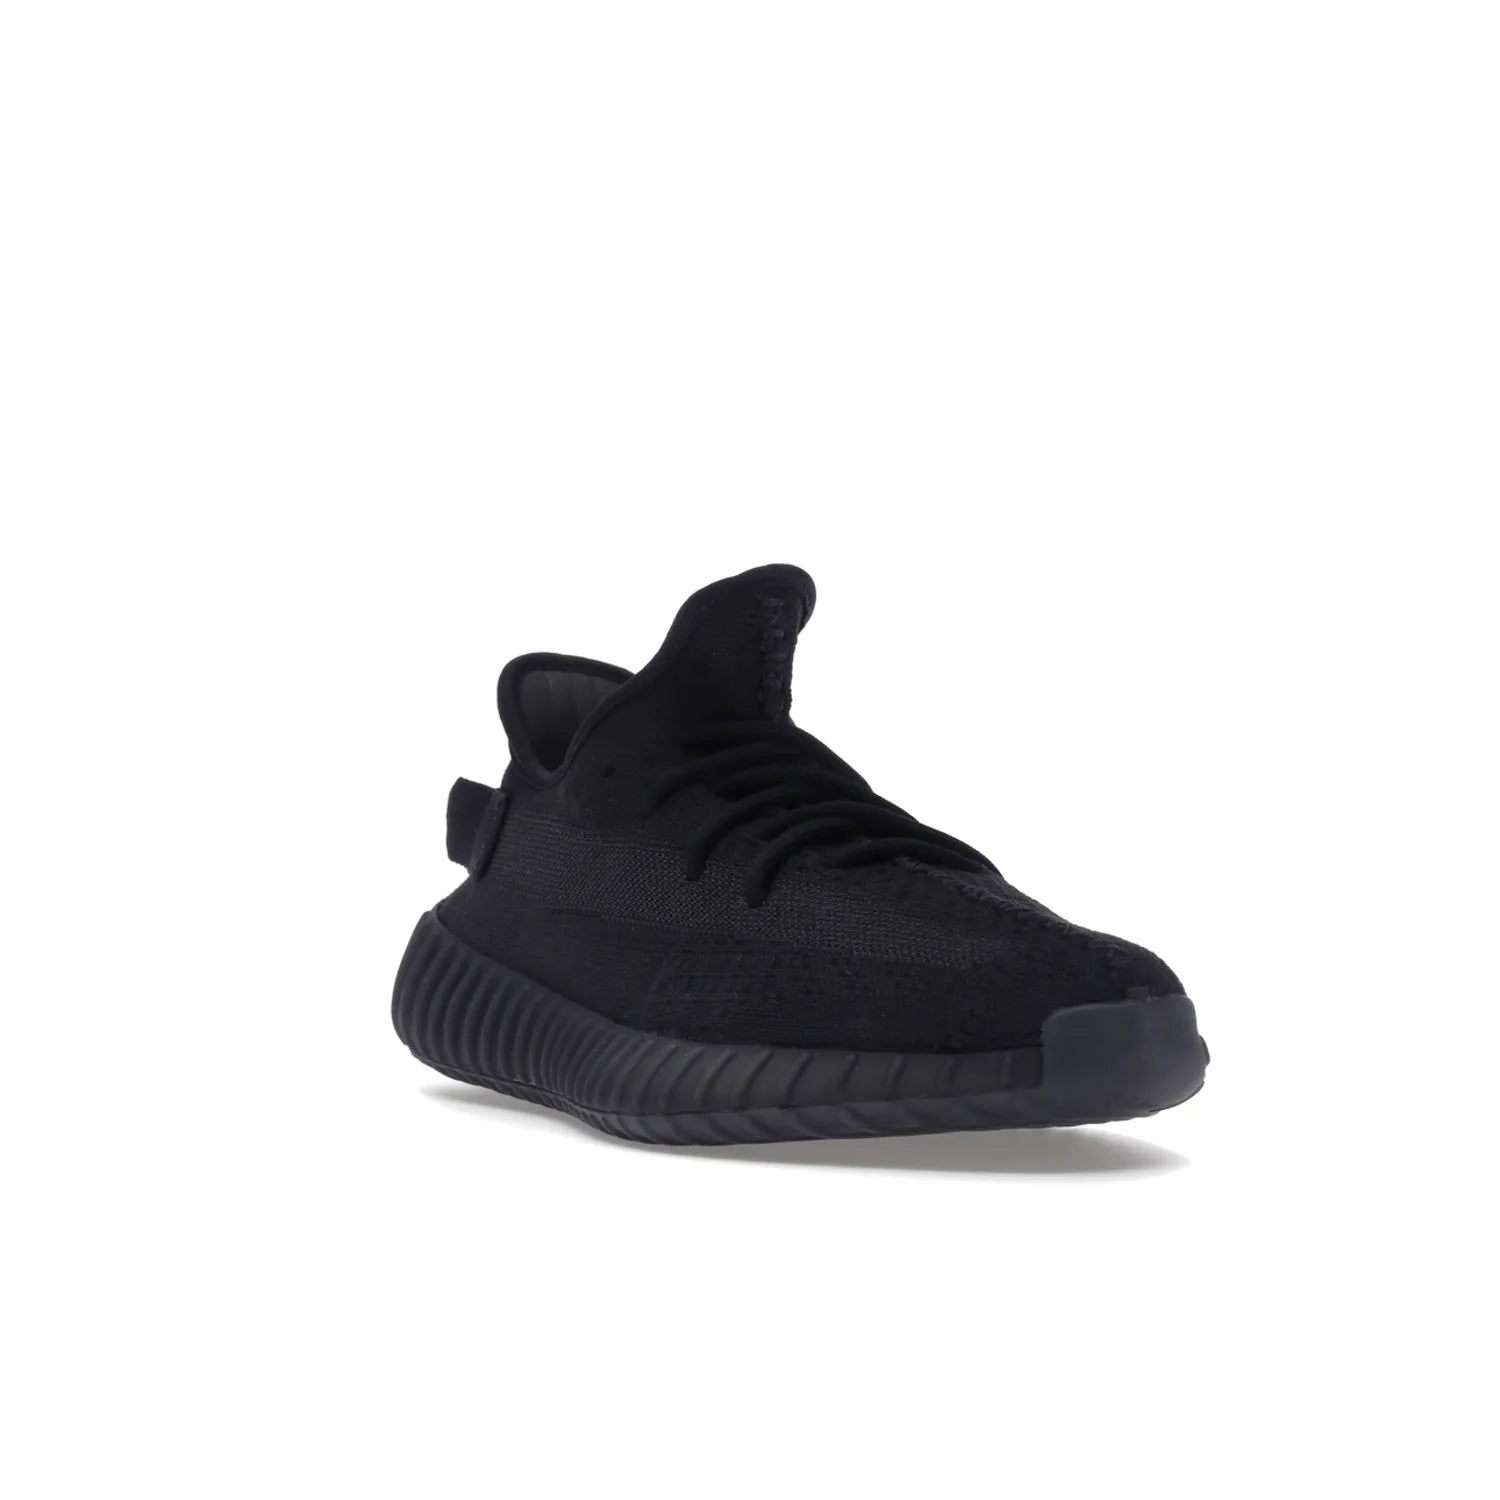 adidas Yeezy Boost 350 V2 Onyx - Image 7 - Only at www.BallersClubKickz.com - Adidas Yeezy Boost 350 V2 Onyx Triple Black shoes for comfort and style. Arriving Spring 2022.